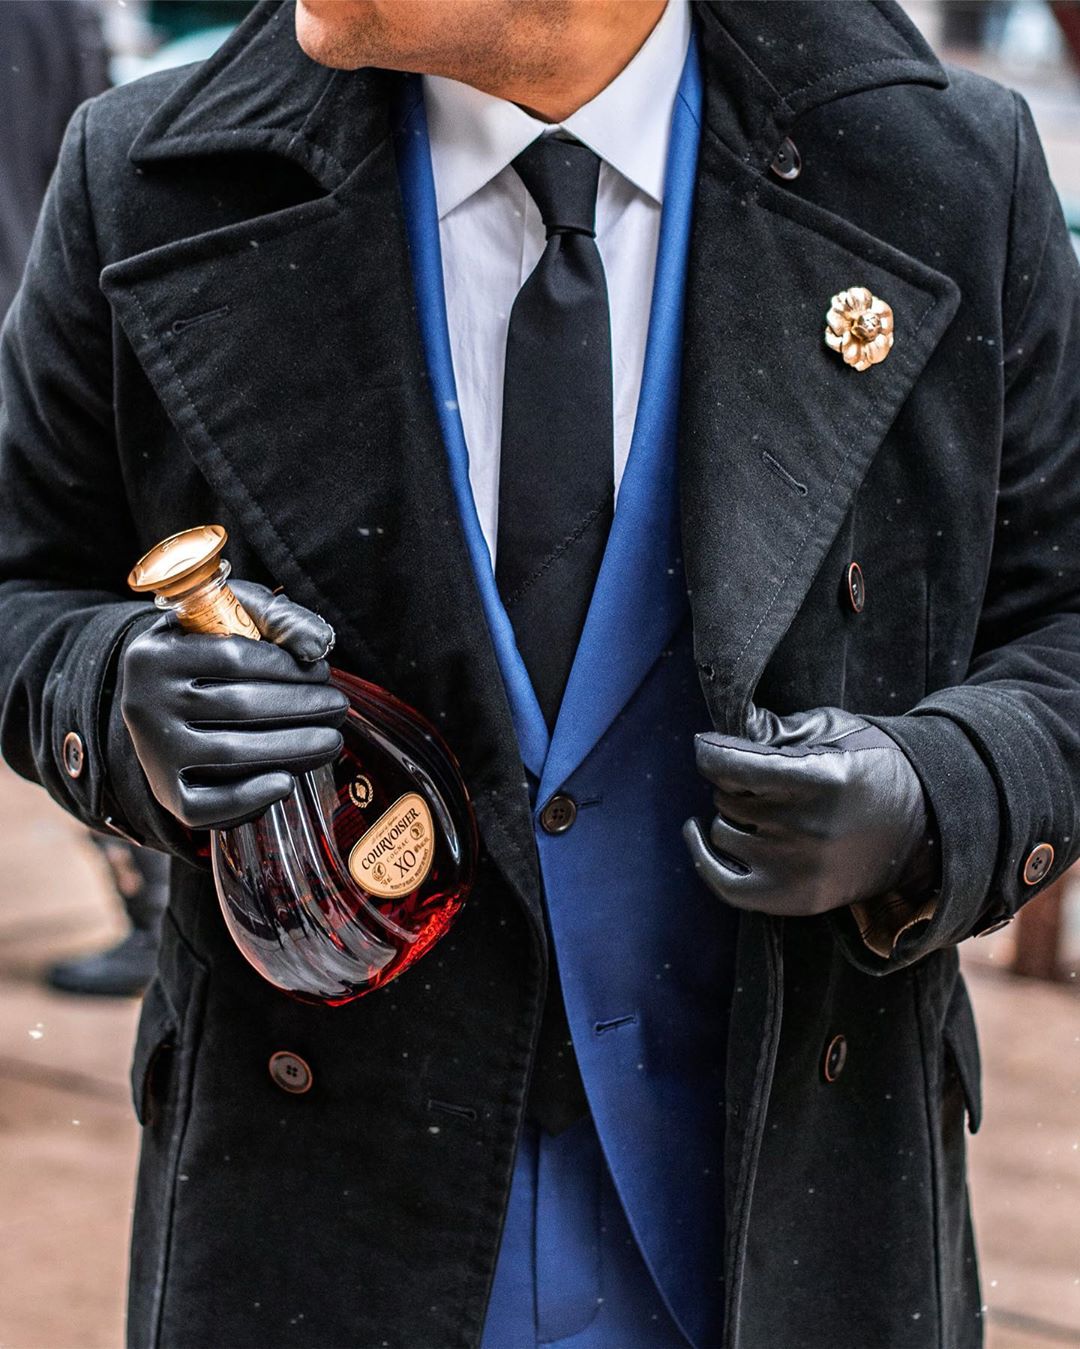 EXCLUSIVE FIRST LOOK AT COURVOISIER AND PUBLIC SCHOOL'S LIMITED EDITION TIE COLLAB - dandy in the bronx - black tie With blue suit and black coat